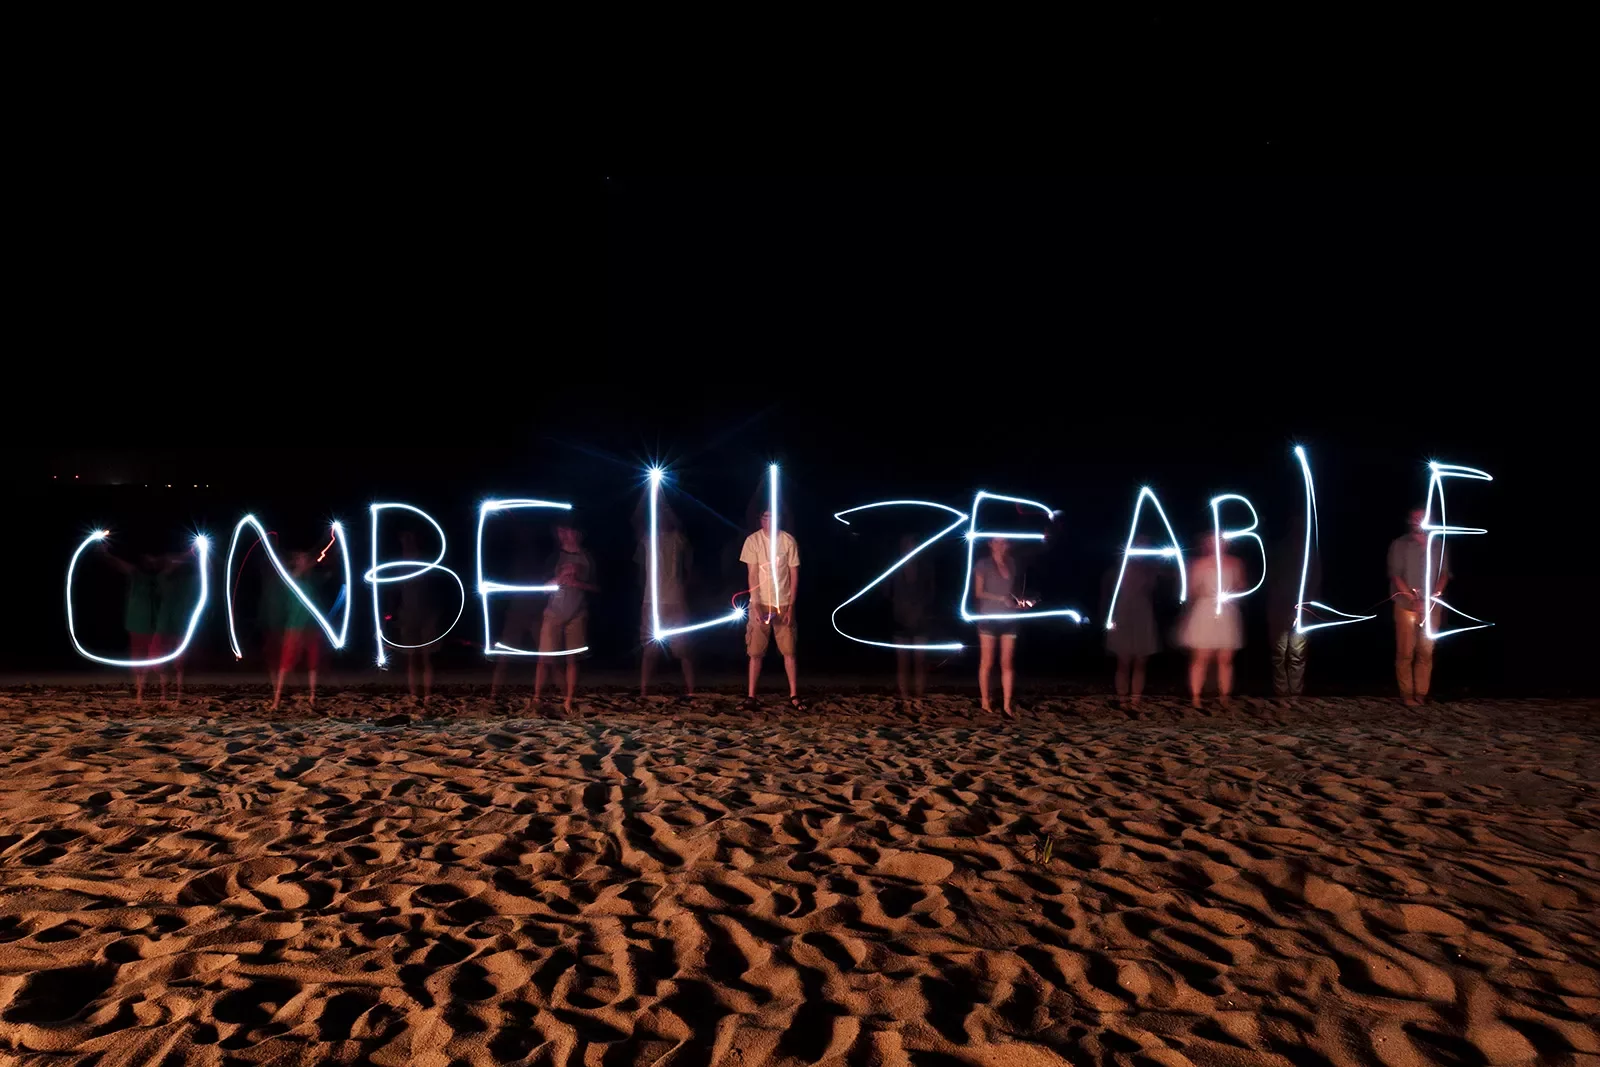 &quot;Unbelizeable&quot; Written by Flash Lights on Beach at Night